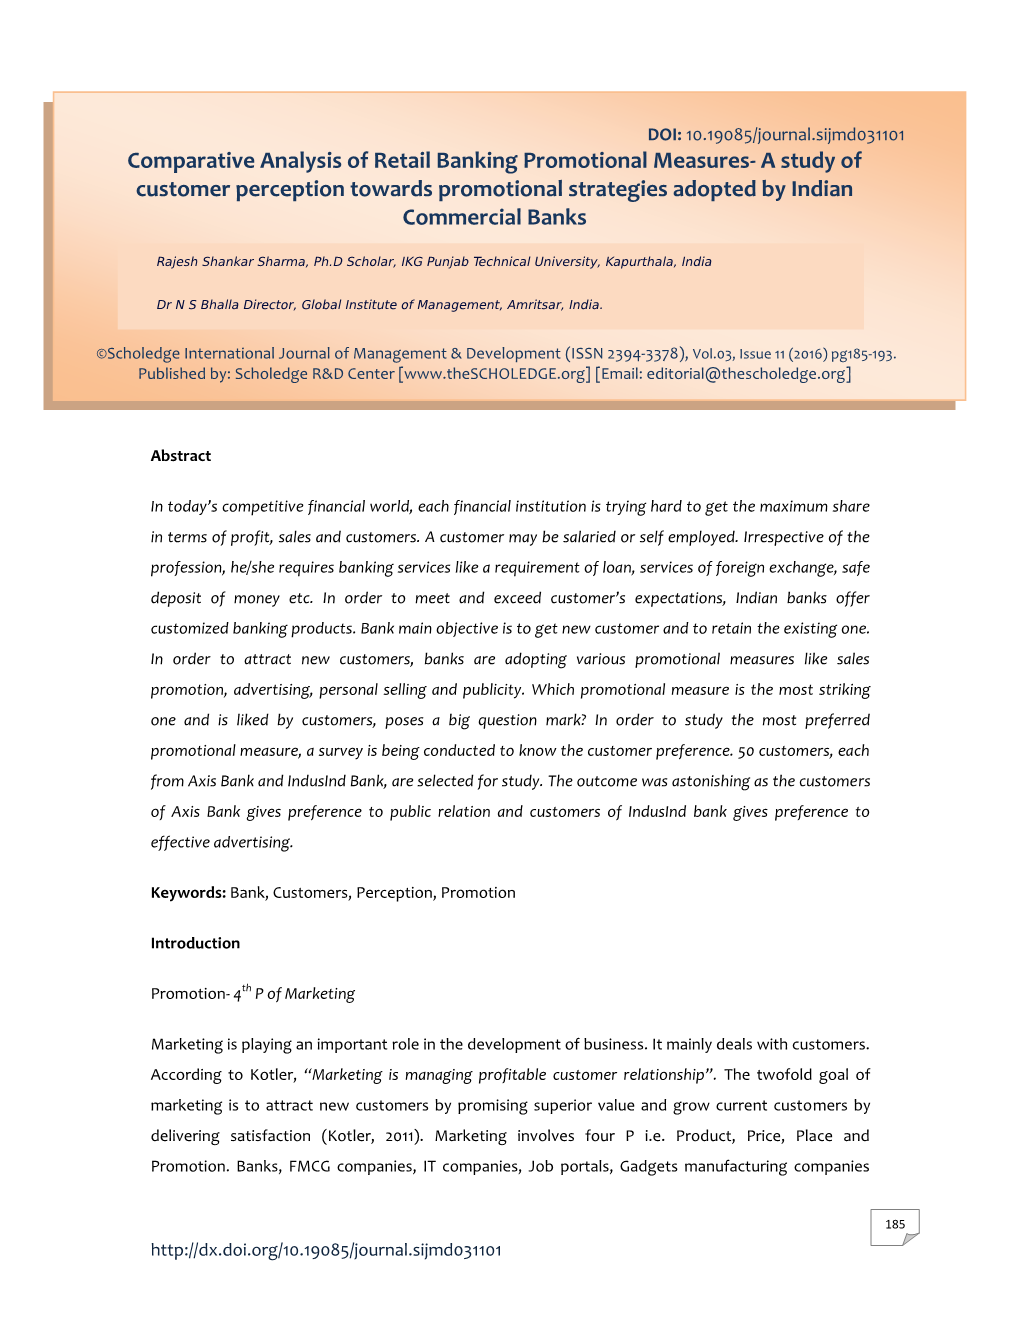 Comparative Analysis of Retail Banking Promotional Measures- a Study of Customer Perception Towards Promotional Strategies Adopted by Indian Commercial Banks